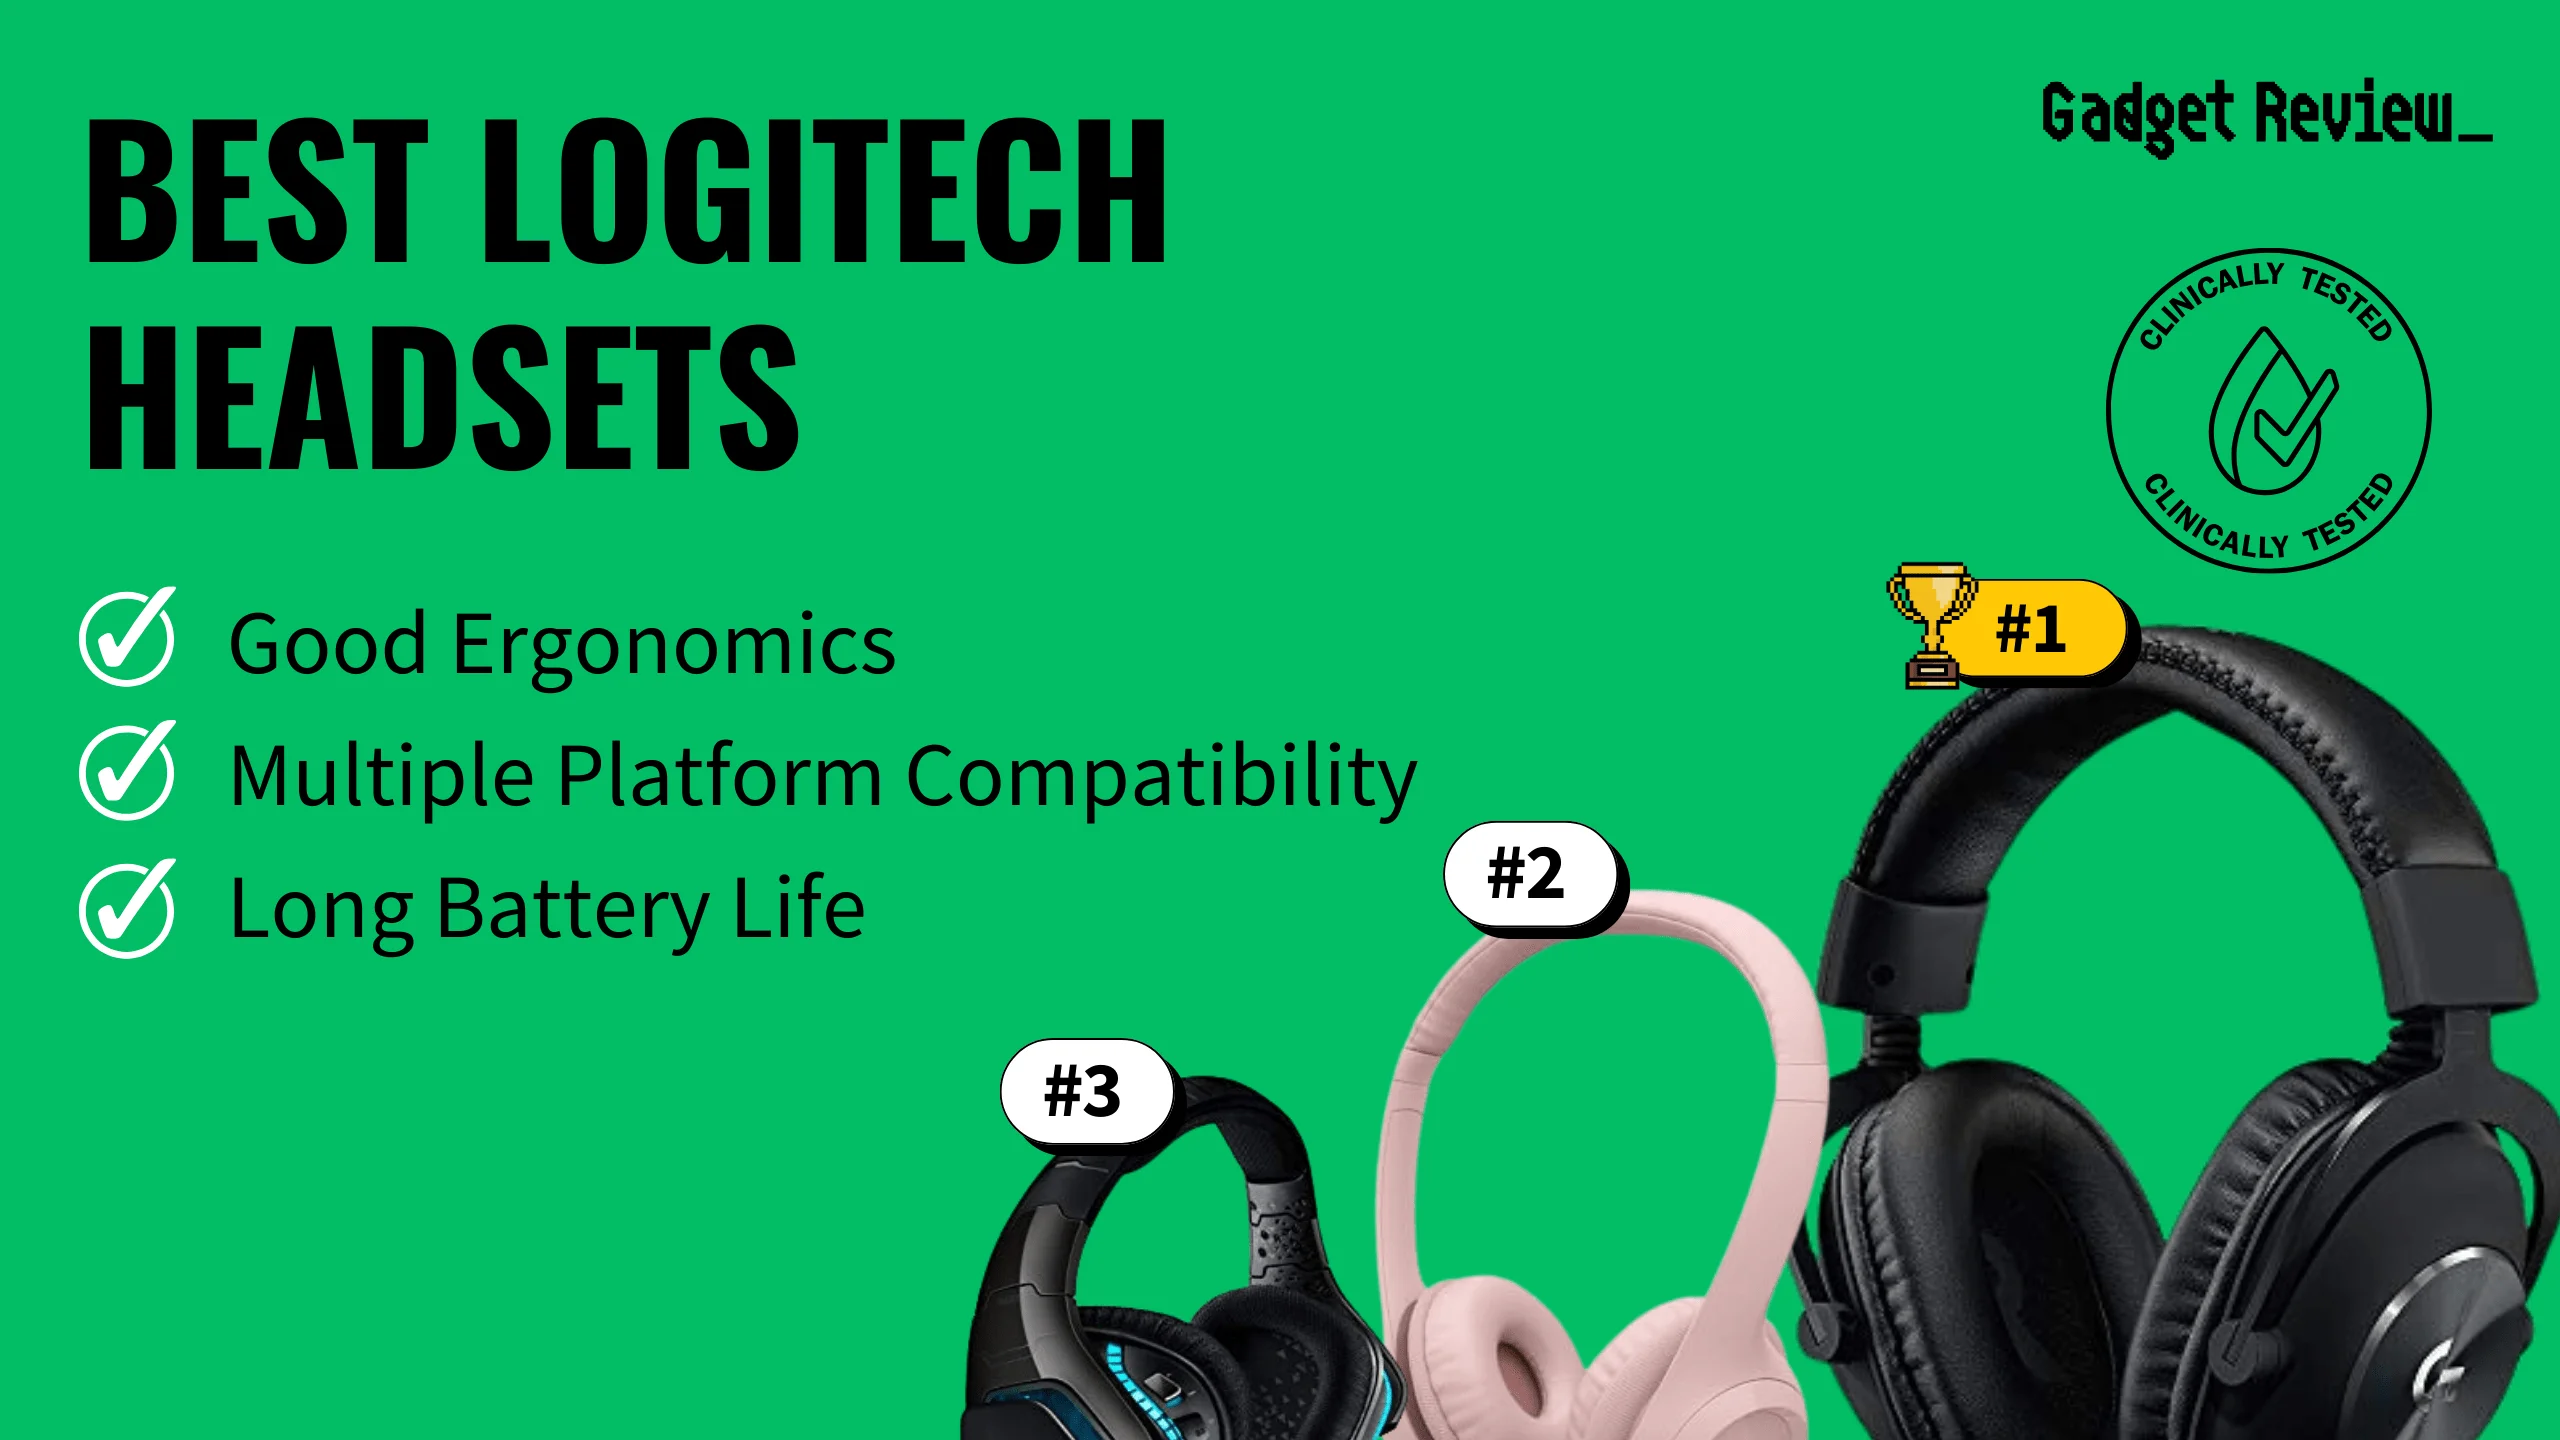 best logitech headset featured image that shows the top three best gaming headset models